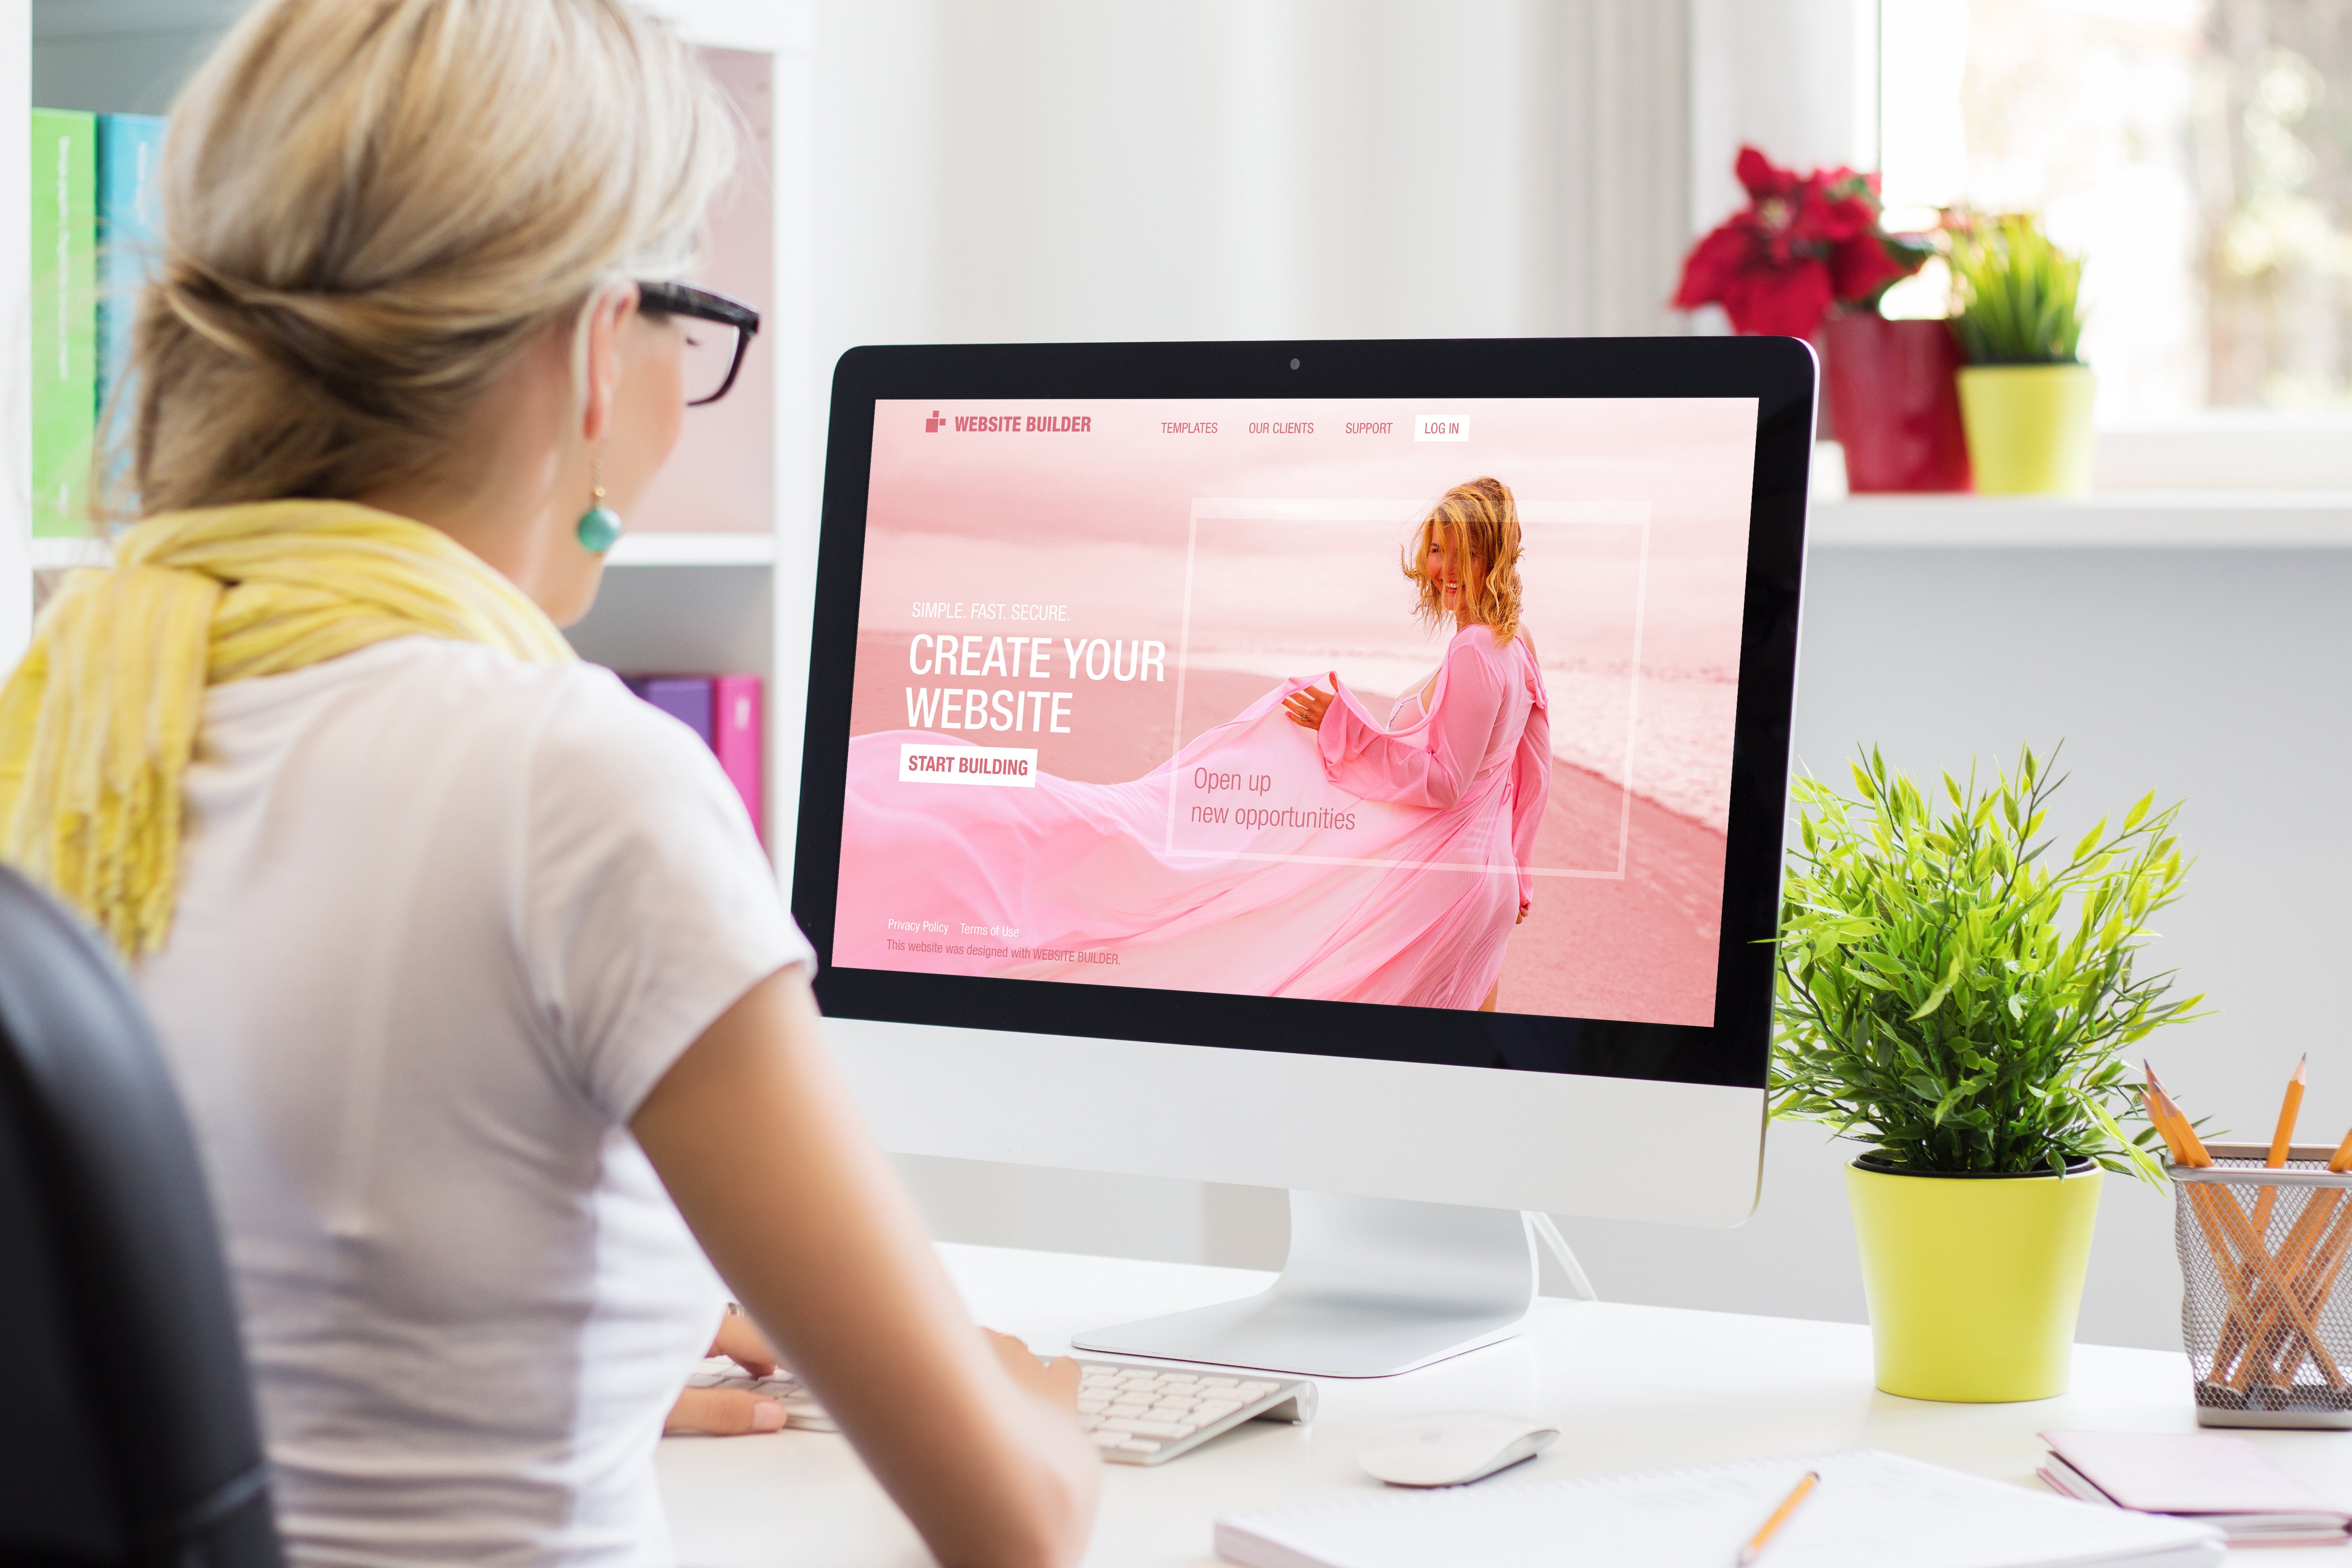 Why You Should Hire a Professional Photographer for Website Graphics